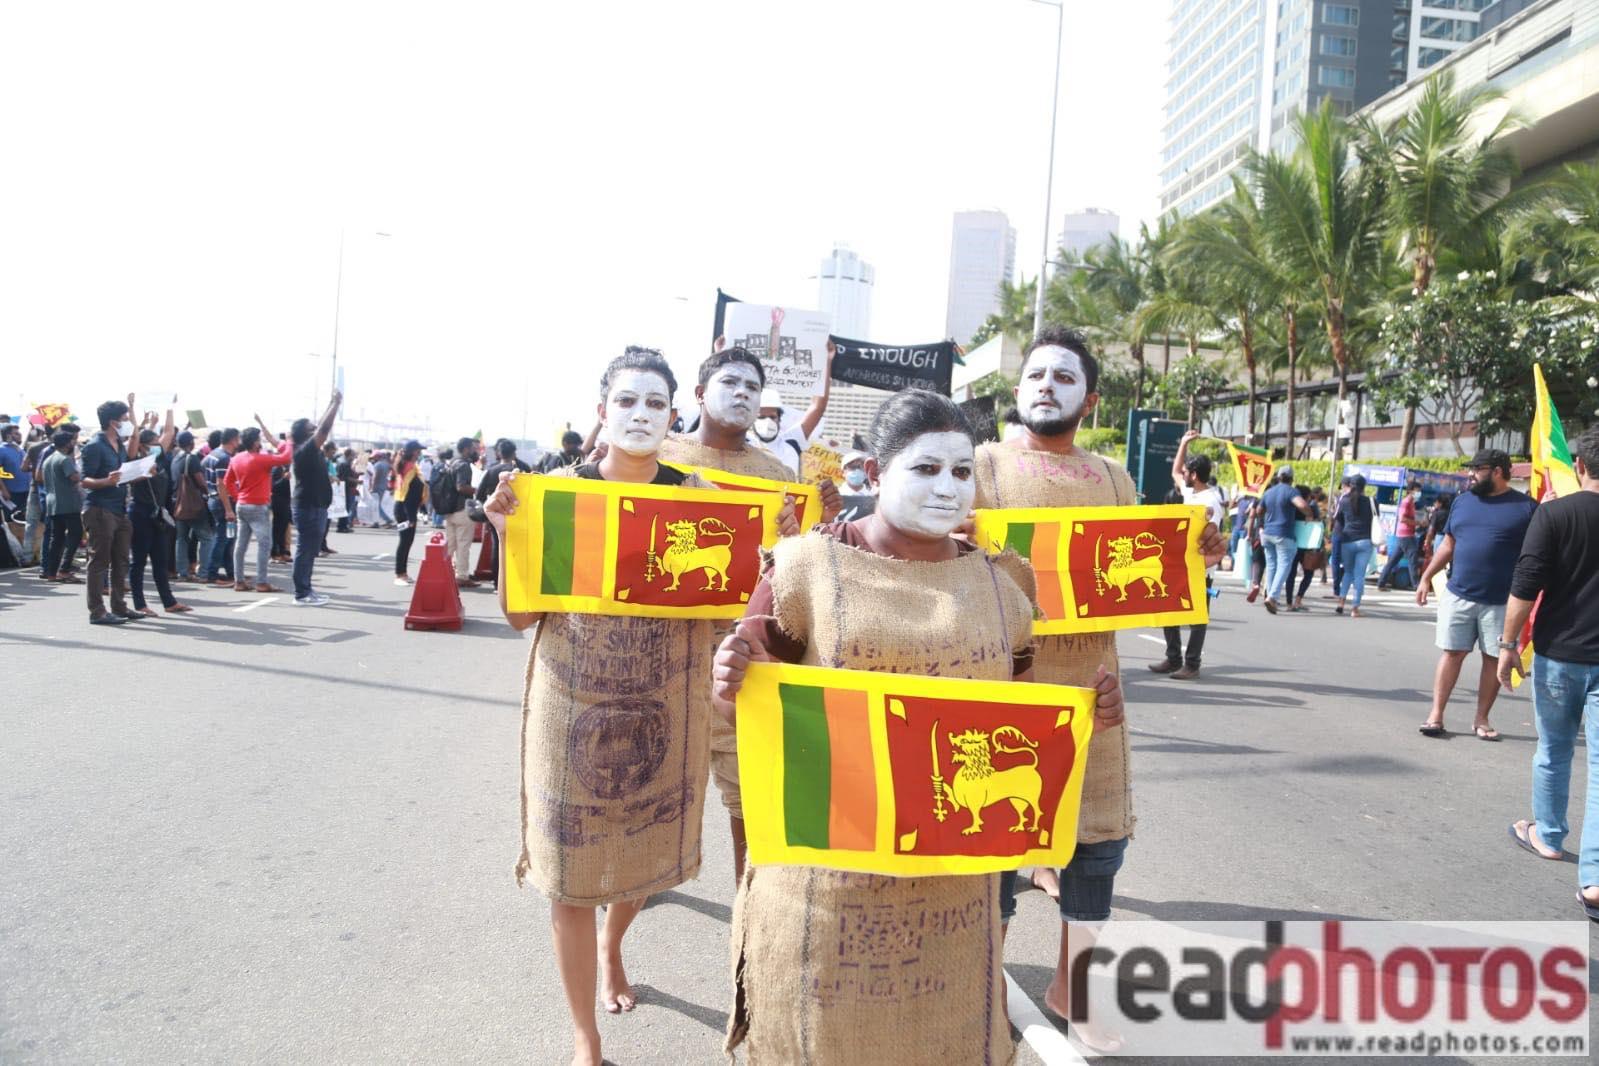 Protests against government at Galle Face Green - 09.04.2022 - Read Photos